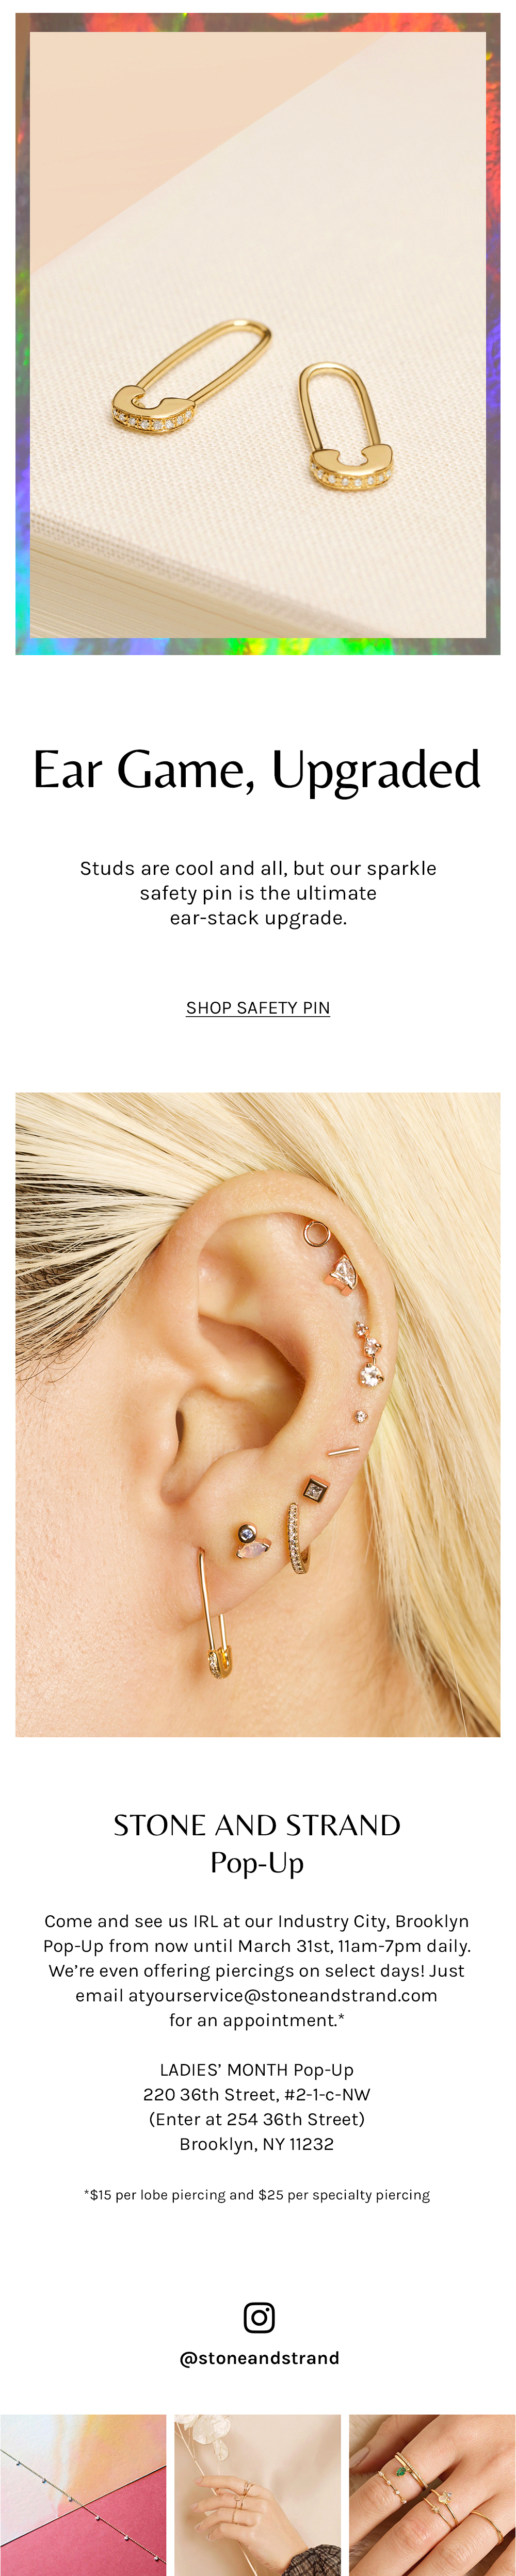 March 21st Safety Pin Earring Emailer 03052019.jpg